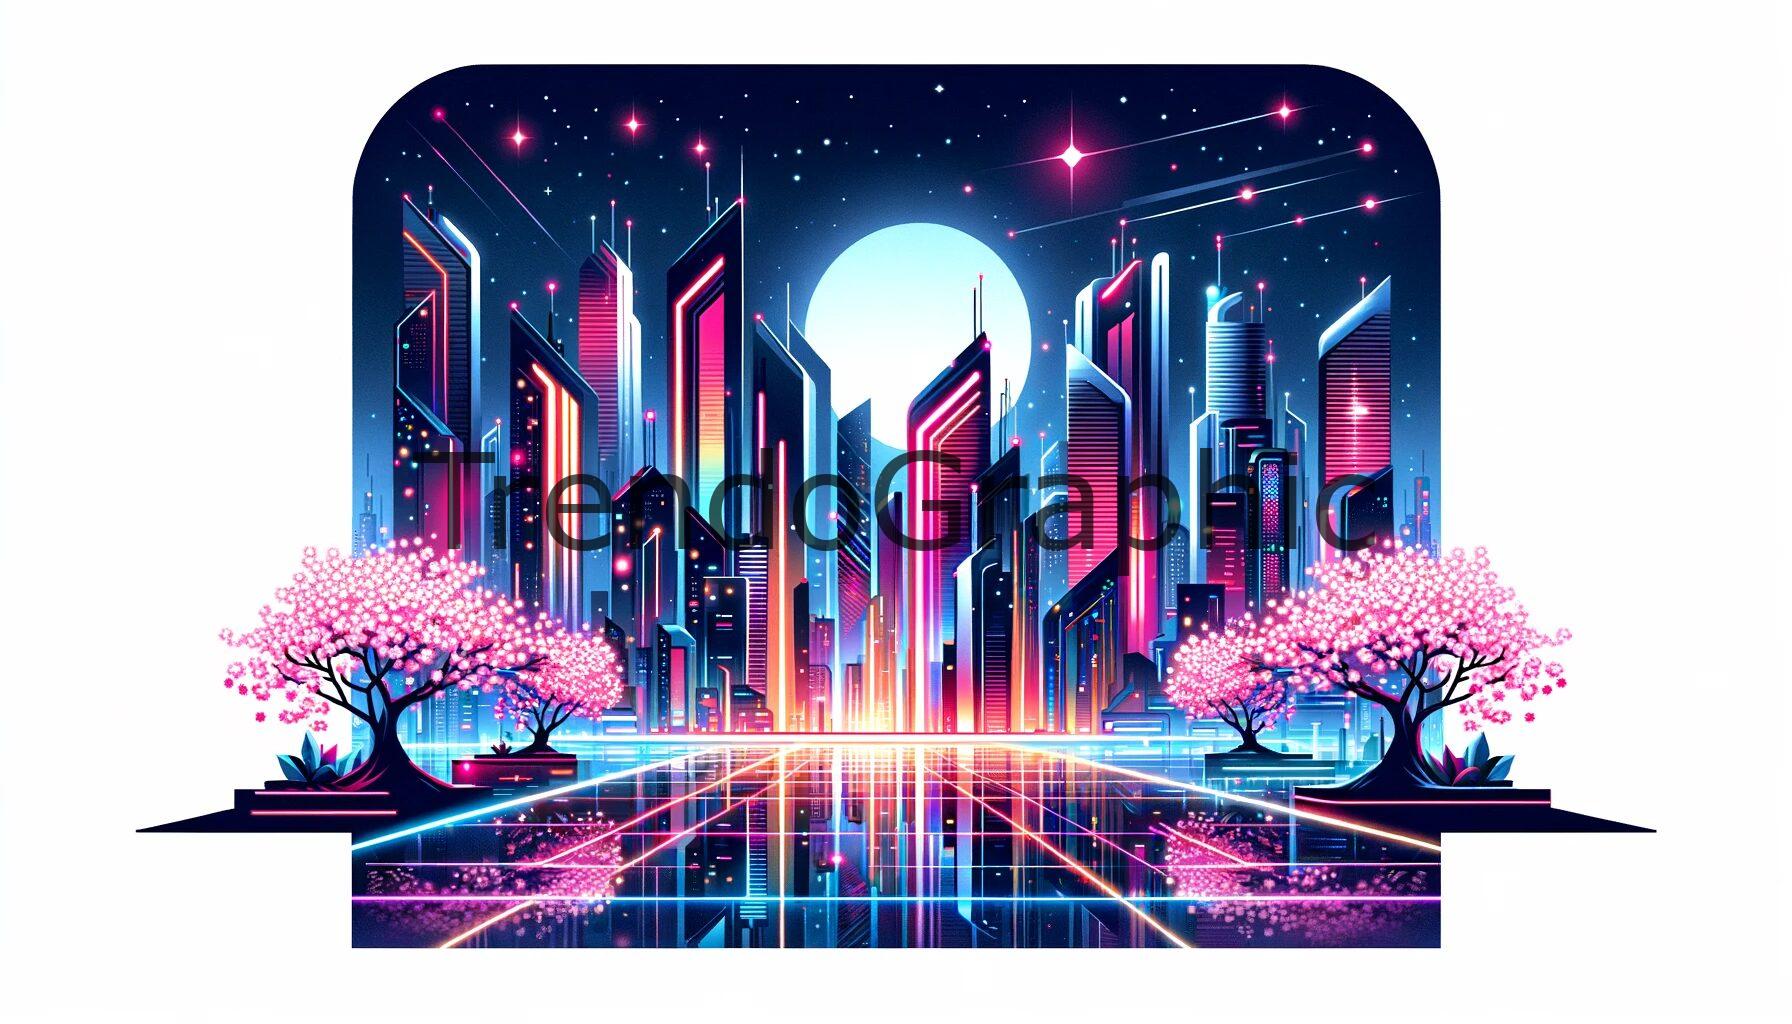 Neon Lights and Cherry Blossoms in a Futuristic City at Night